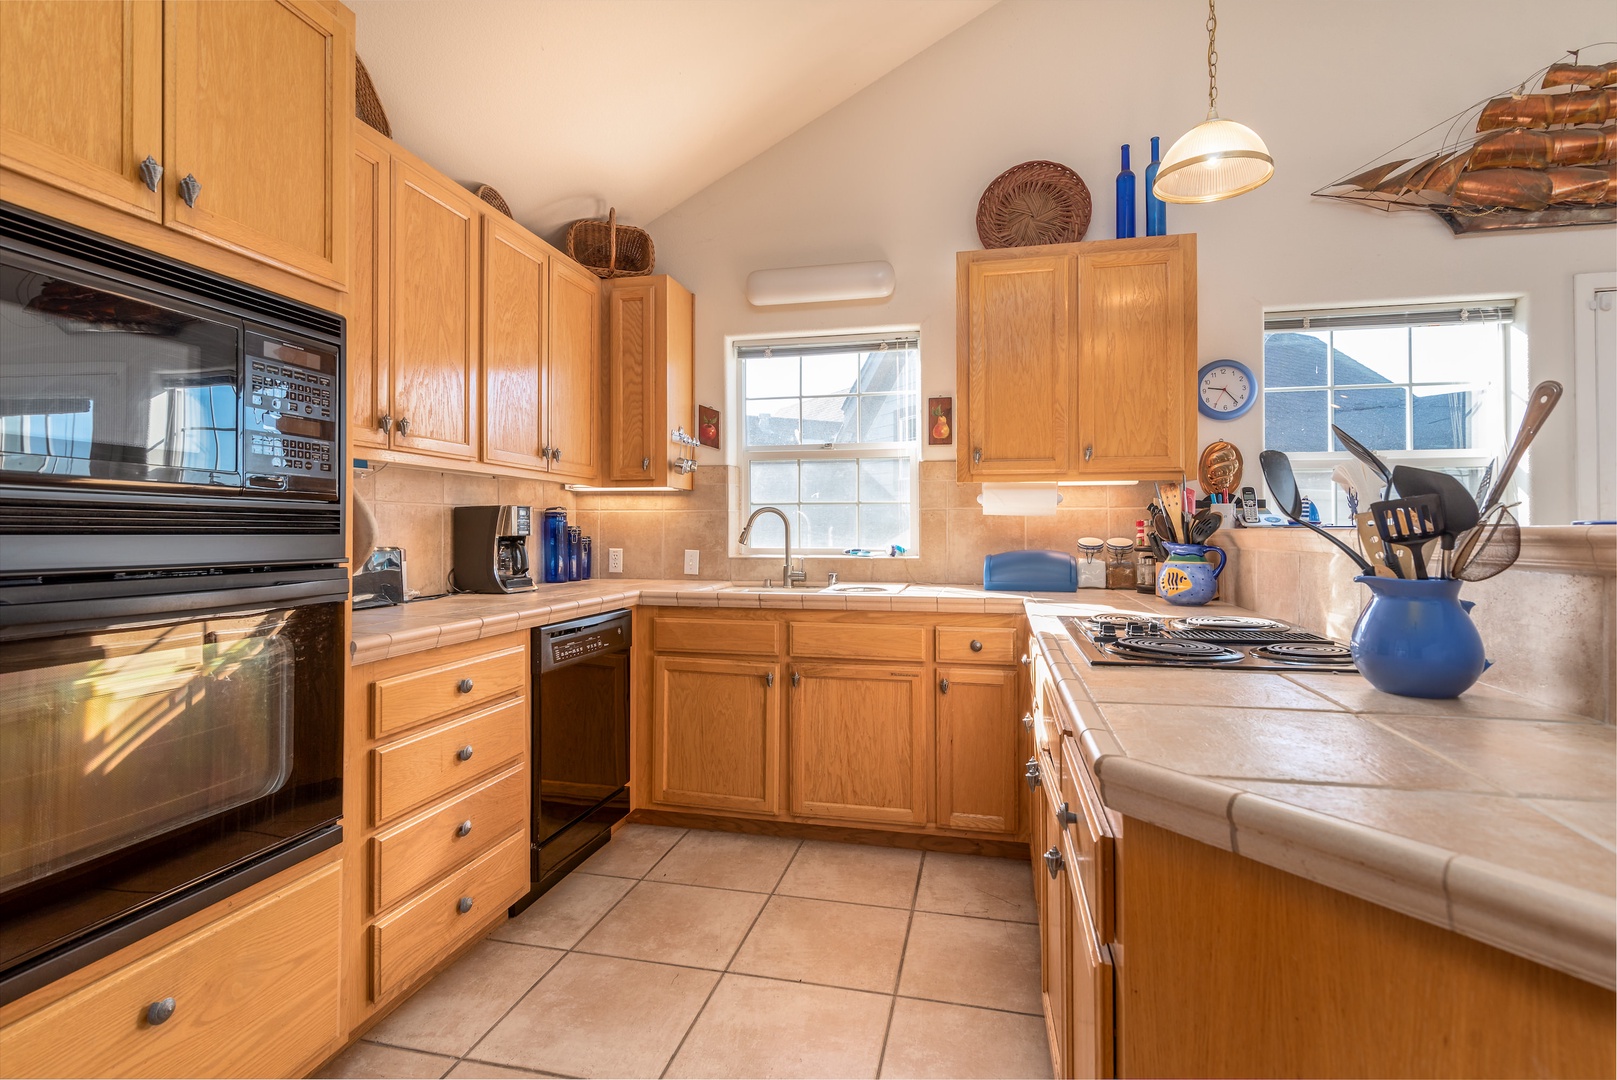 Kitchen with drip coffee maker, toaster, and more